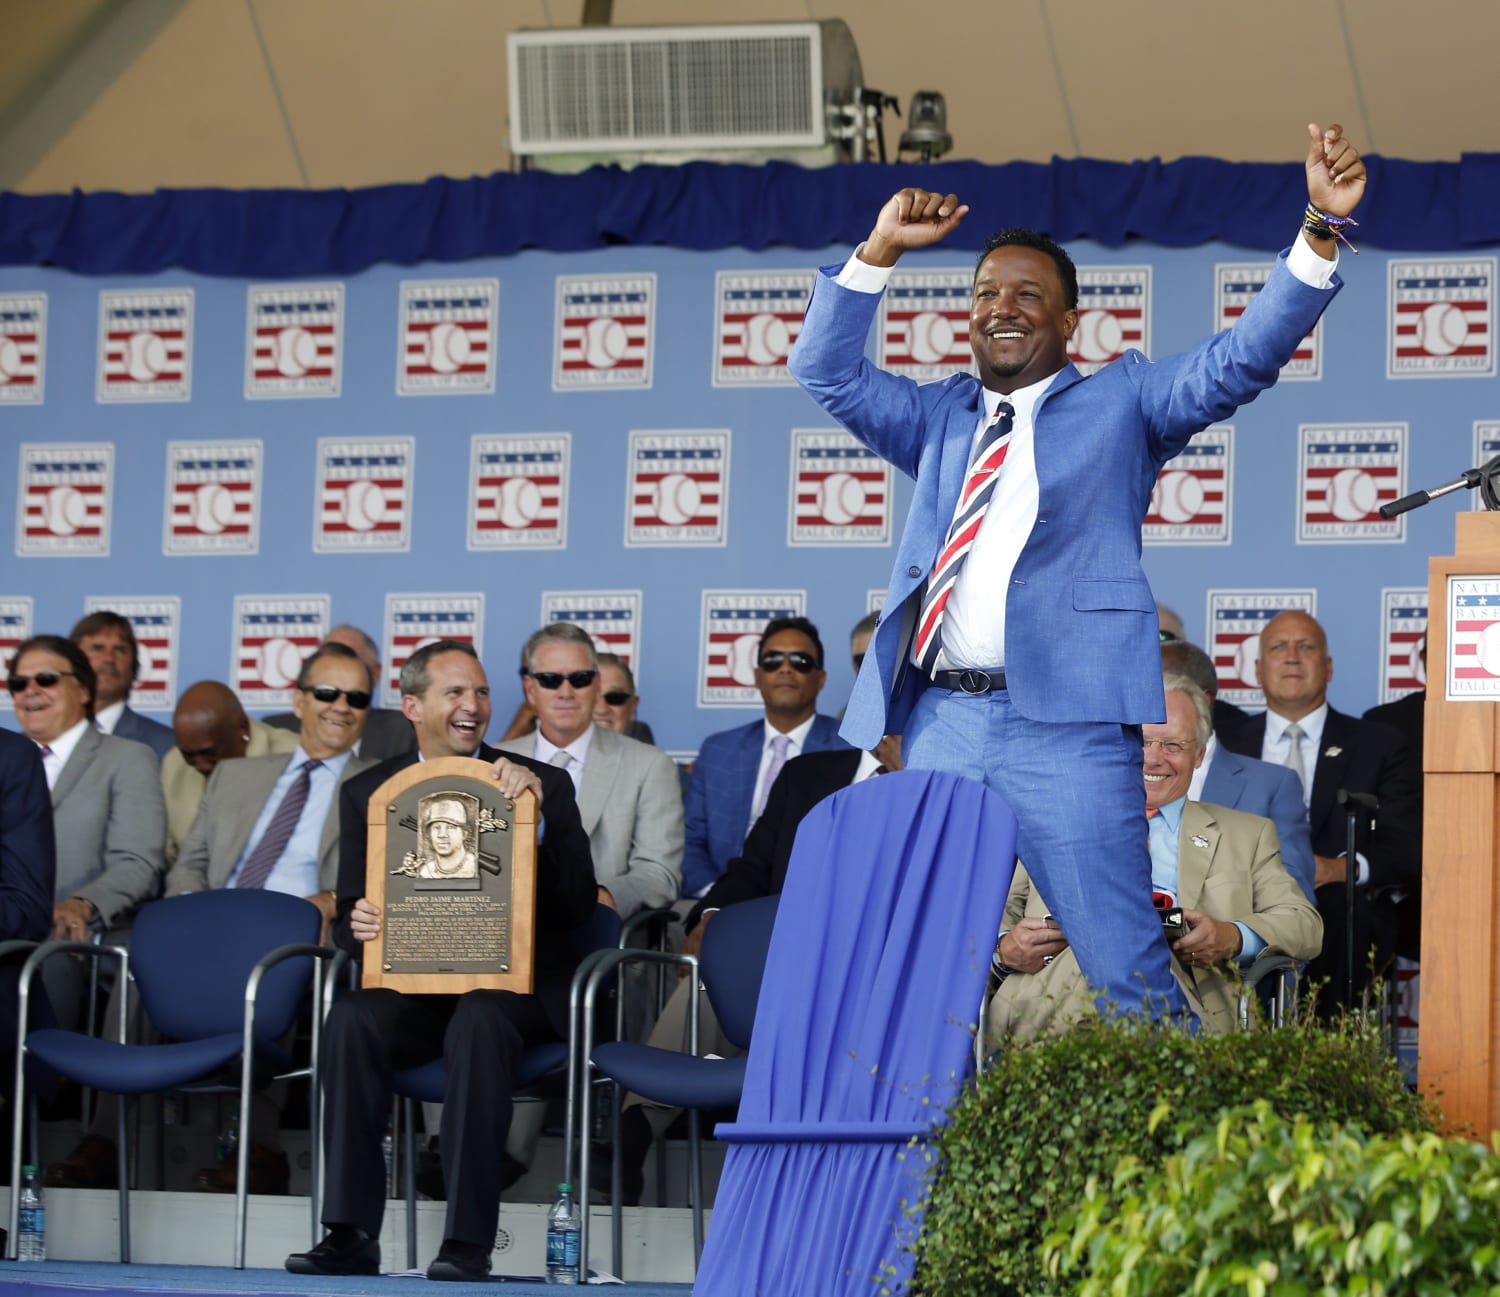 Upon Pedro Martinez's induction to the Hall of Fame, a remembrance